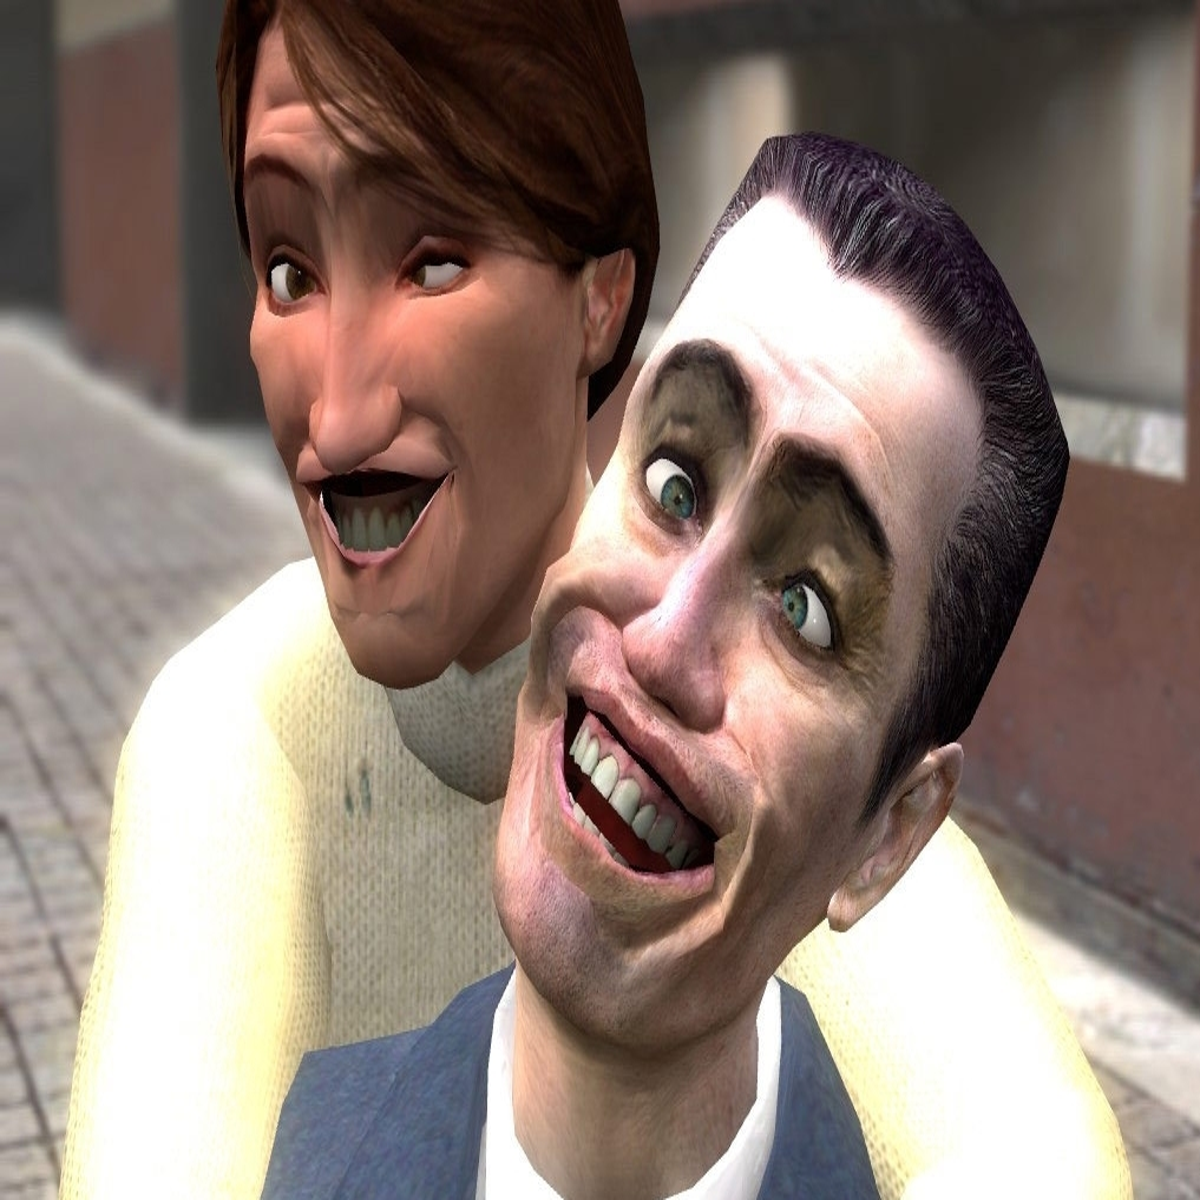 Since Garry Newman is working on Garry's Mod 2 (S&box), I thought it would  be awesome to recreate this classic image thanks to the release of the  Half-Life: Alyx Tools! : r/HalfLife